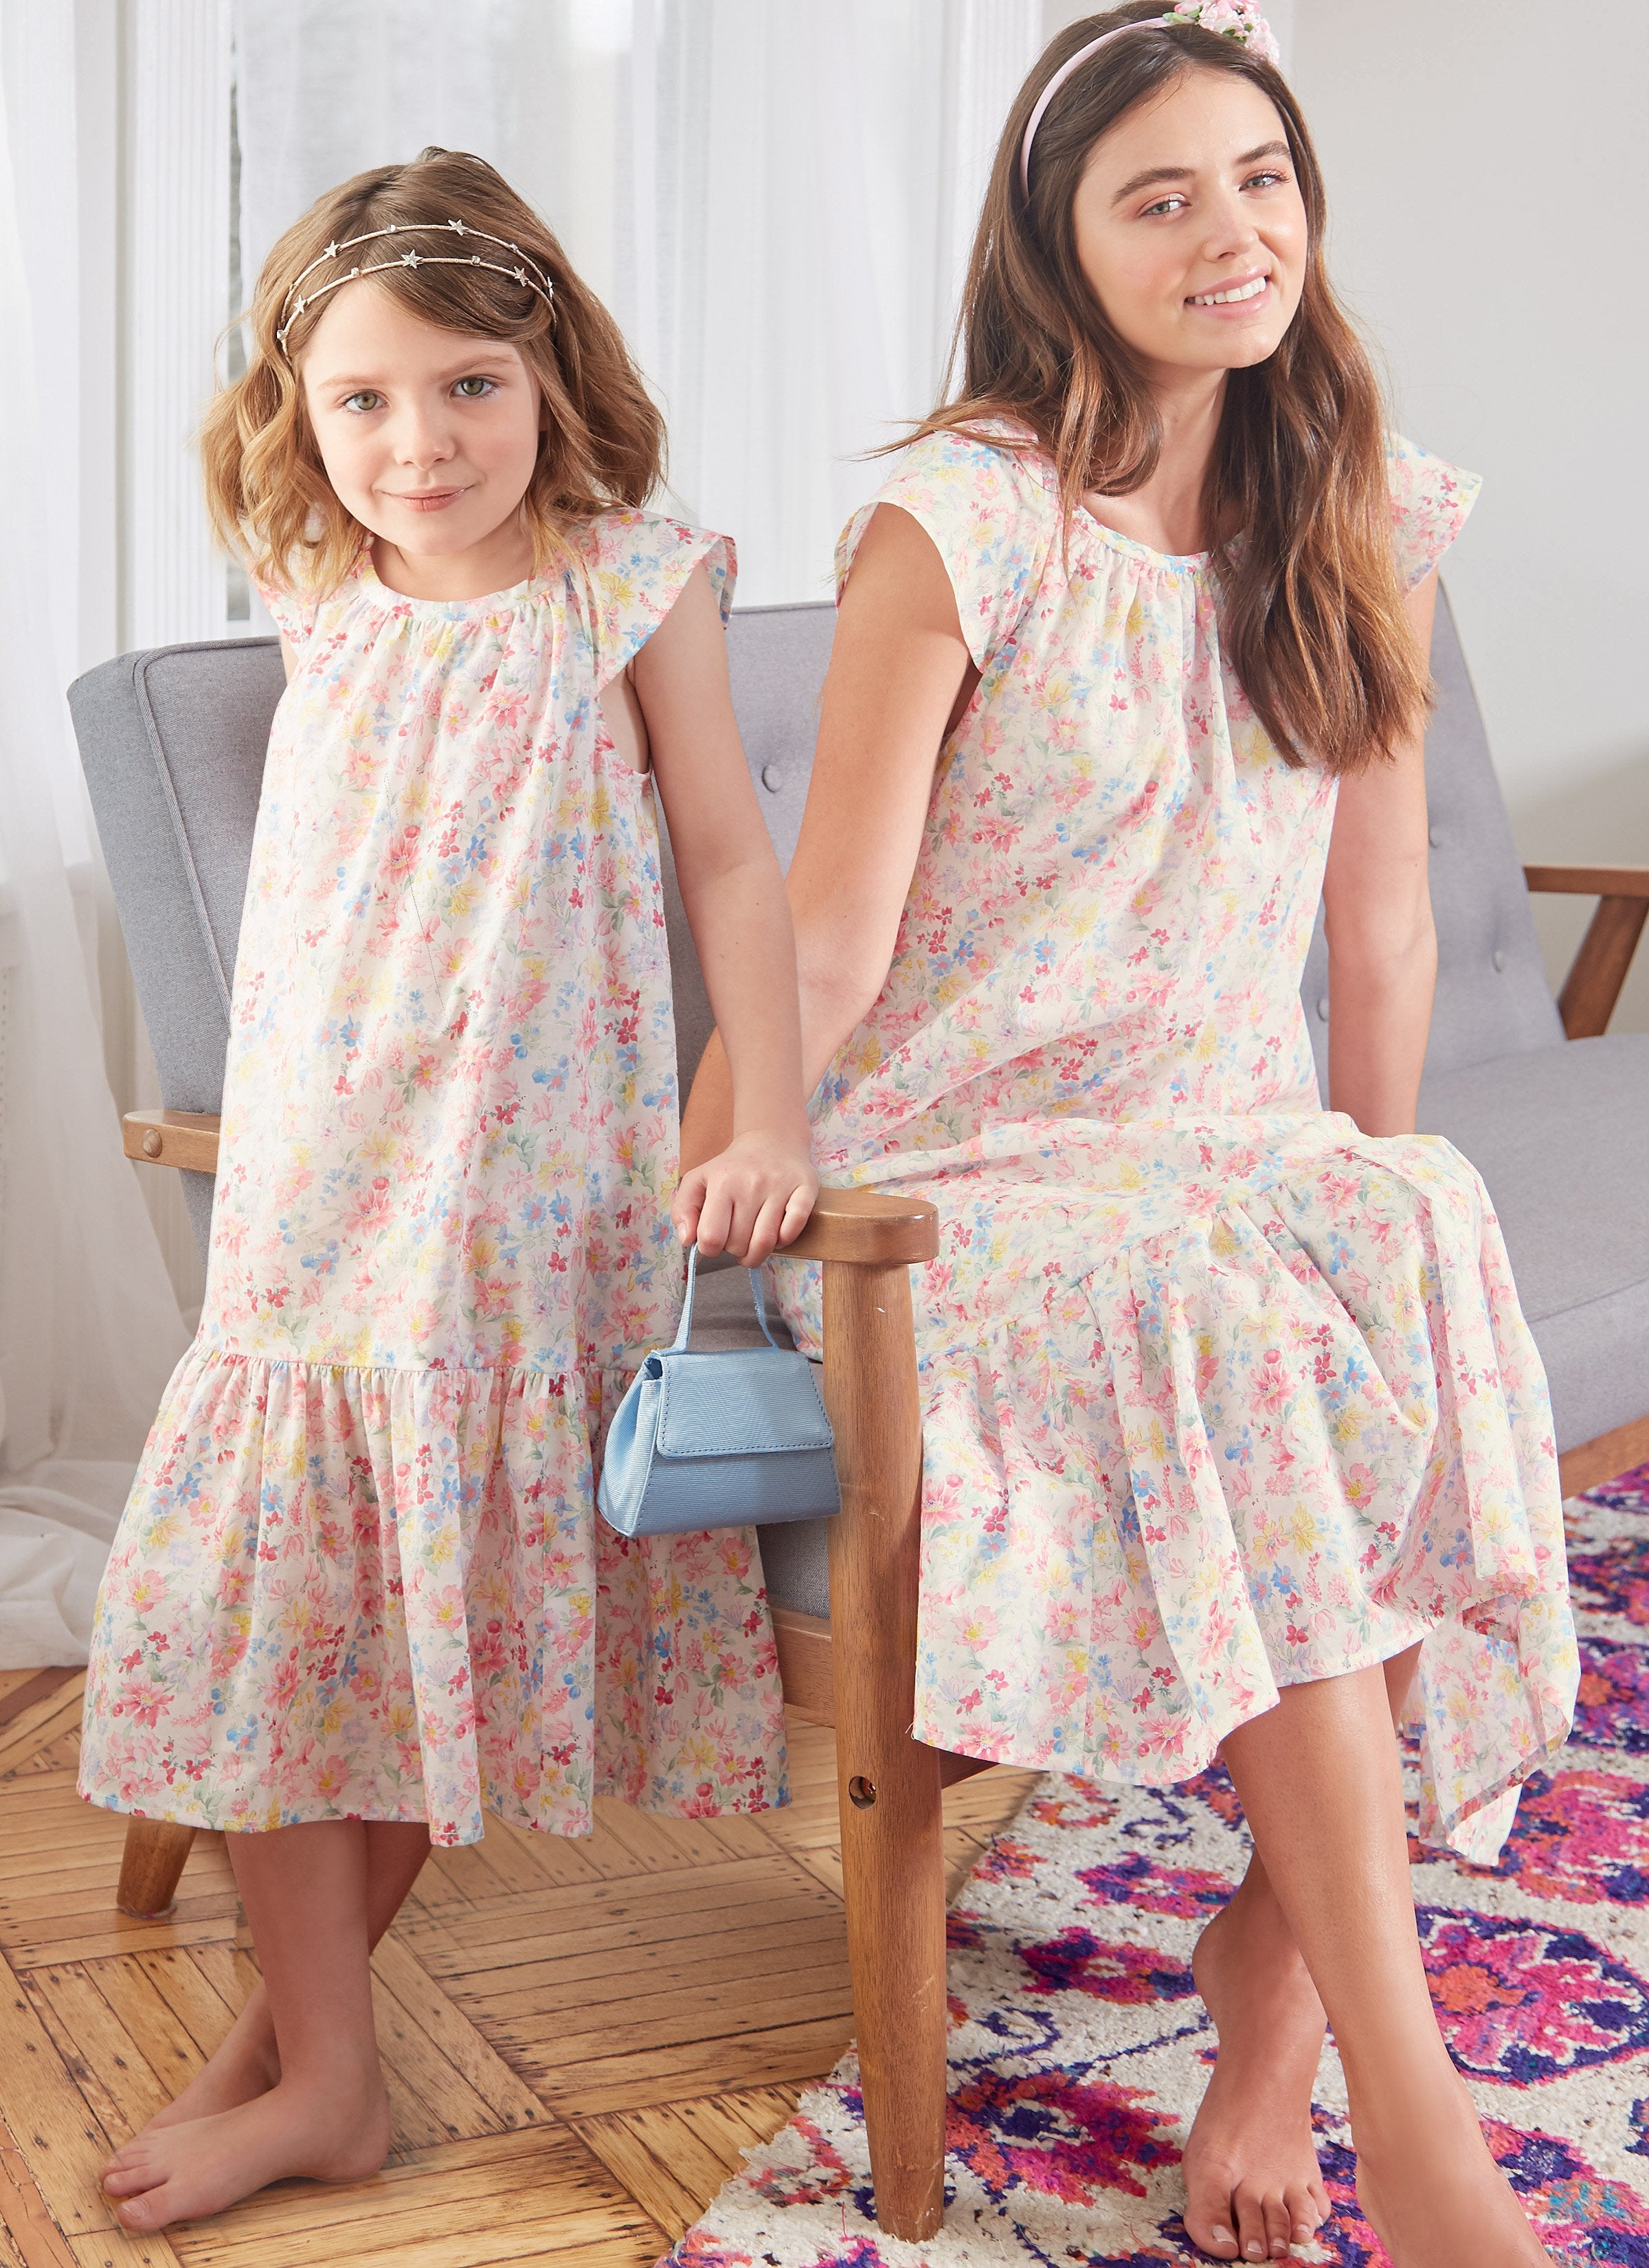 McCall's 8216 Misses' and Children's Dresses sewing pattern from Jaycotts Sewing Supplies